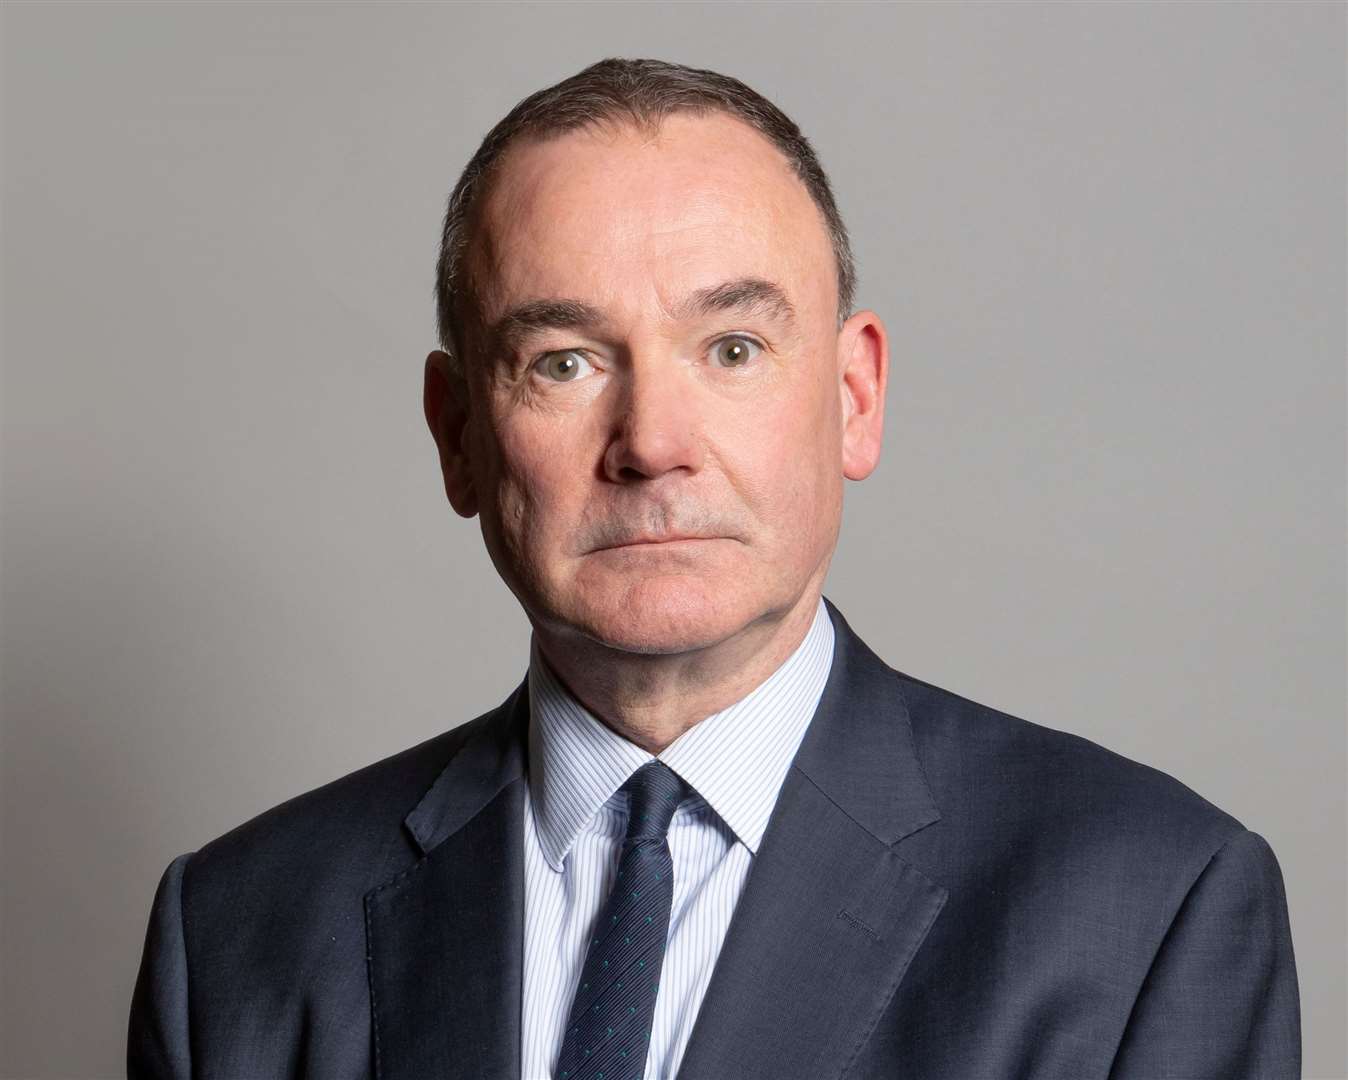 Jon Cruddas MP: There's witchhunt